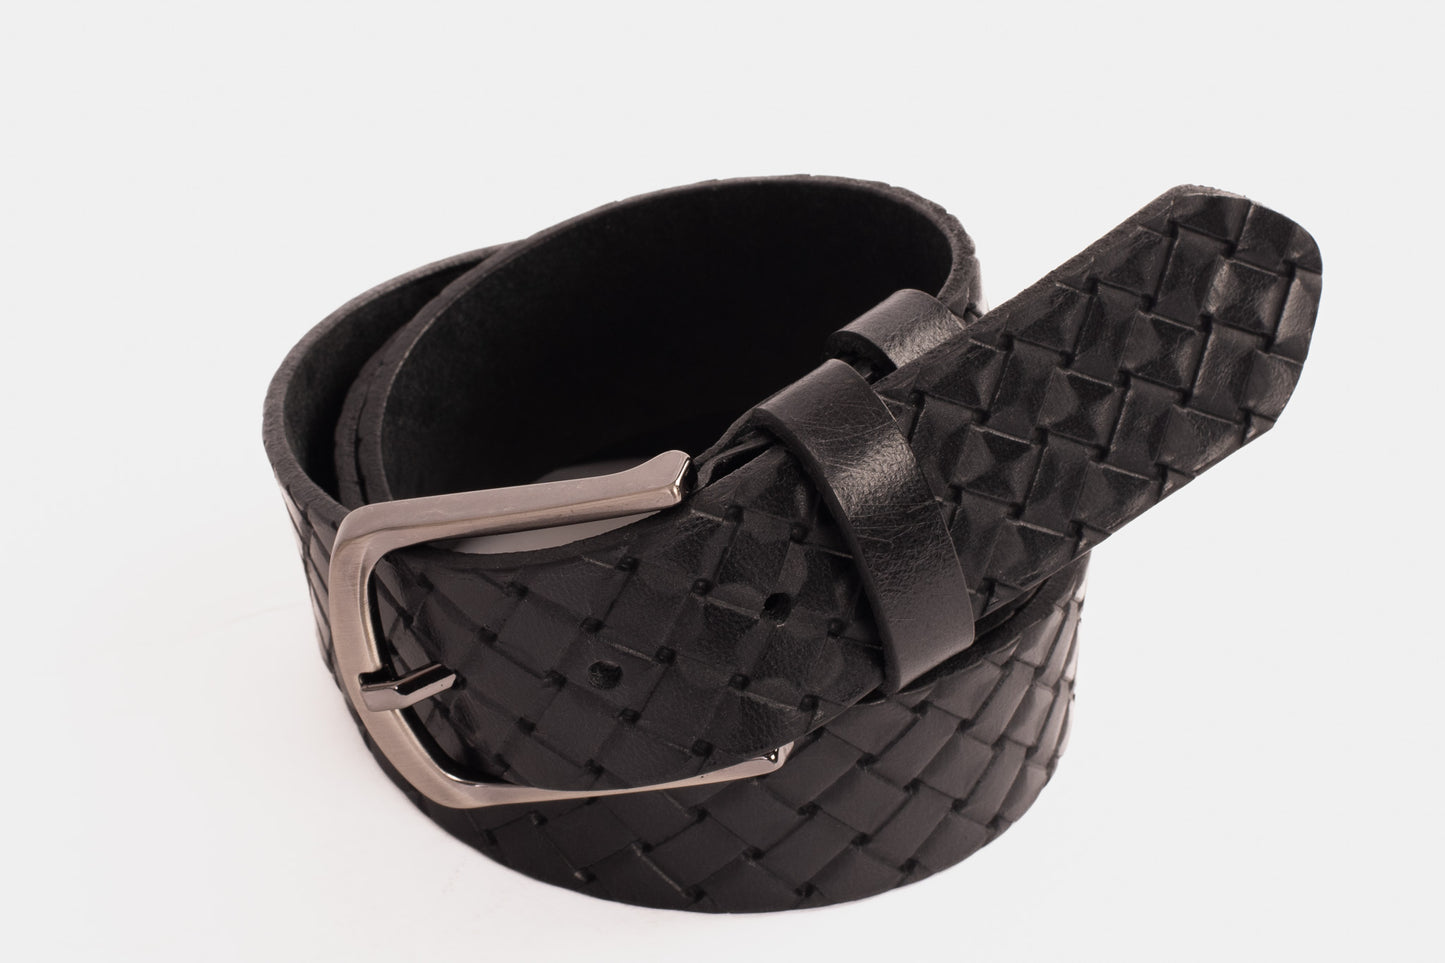 The Turan Black Woven Leather Belt